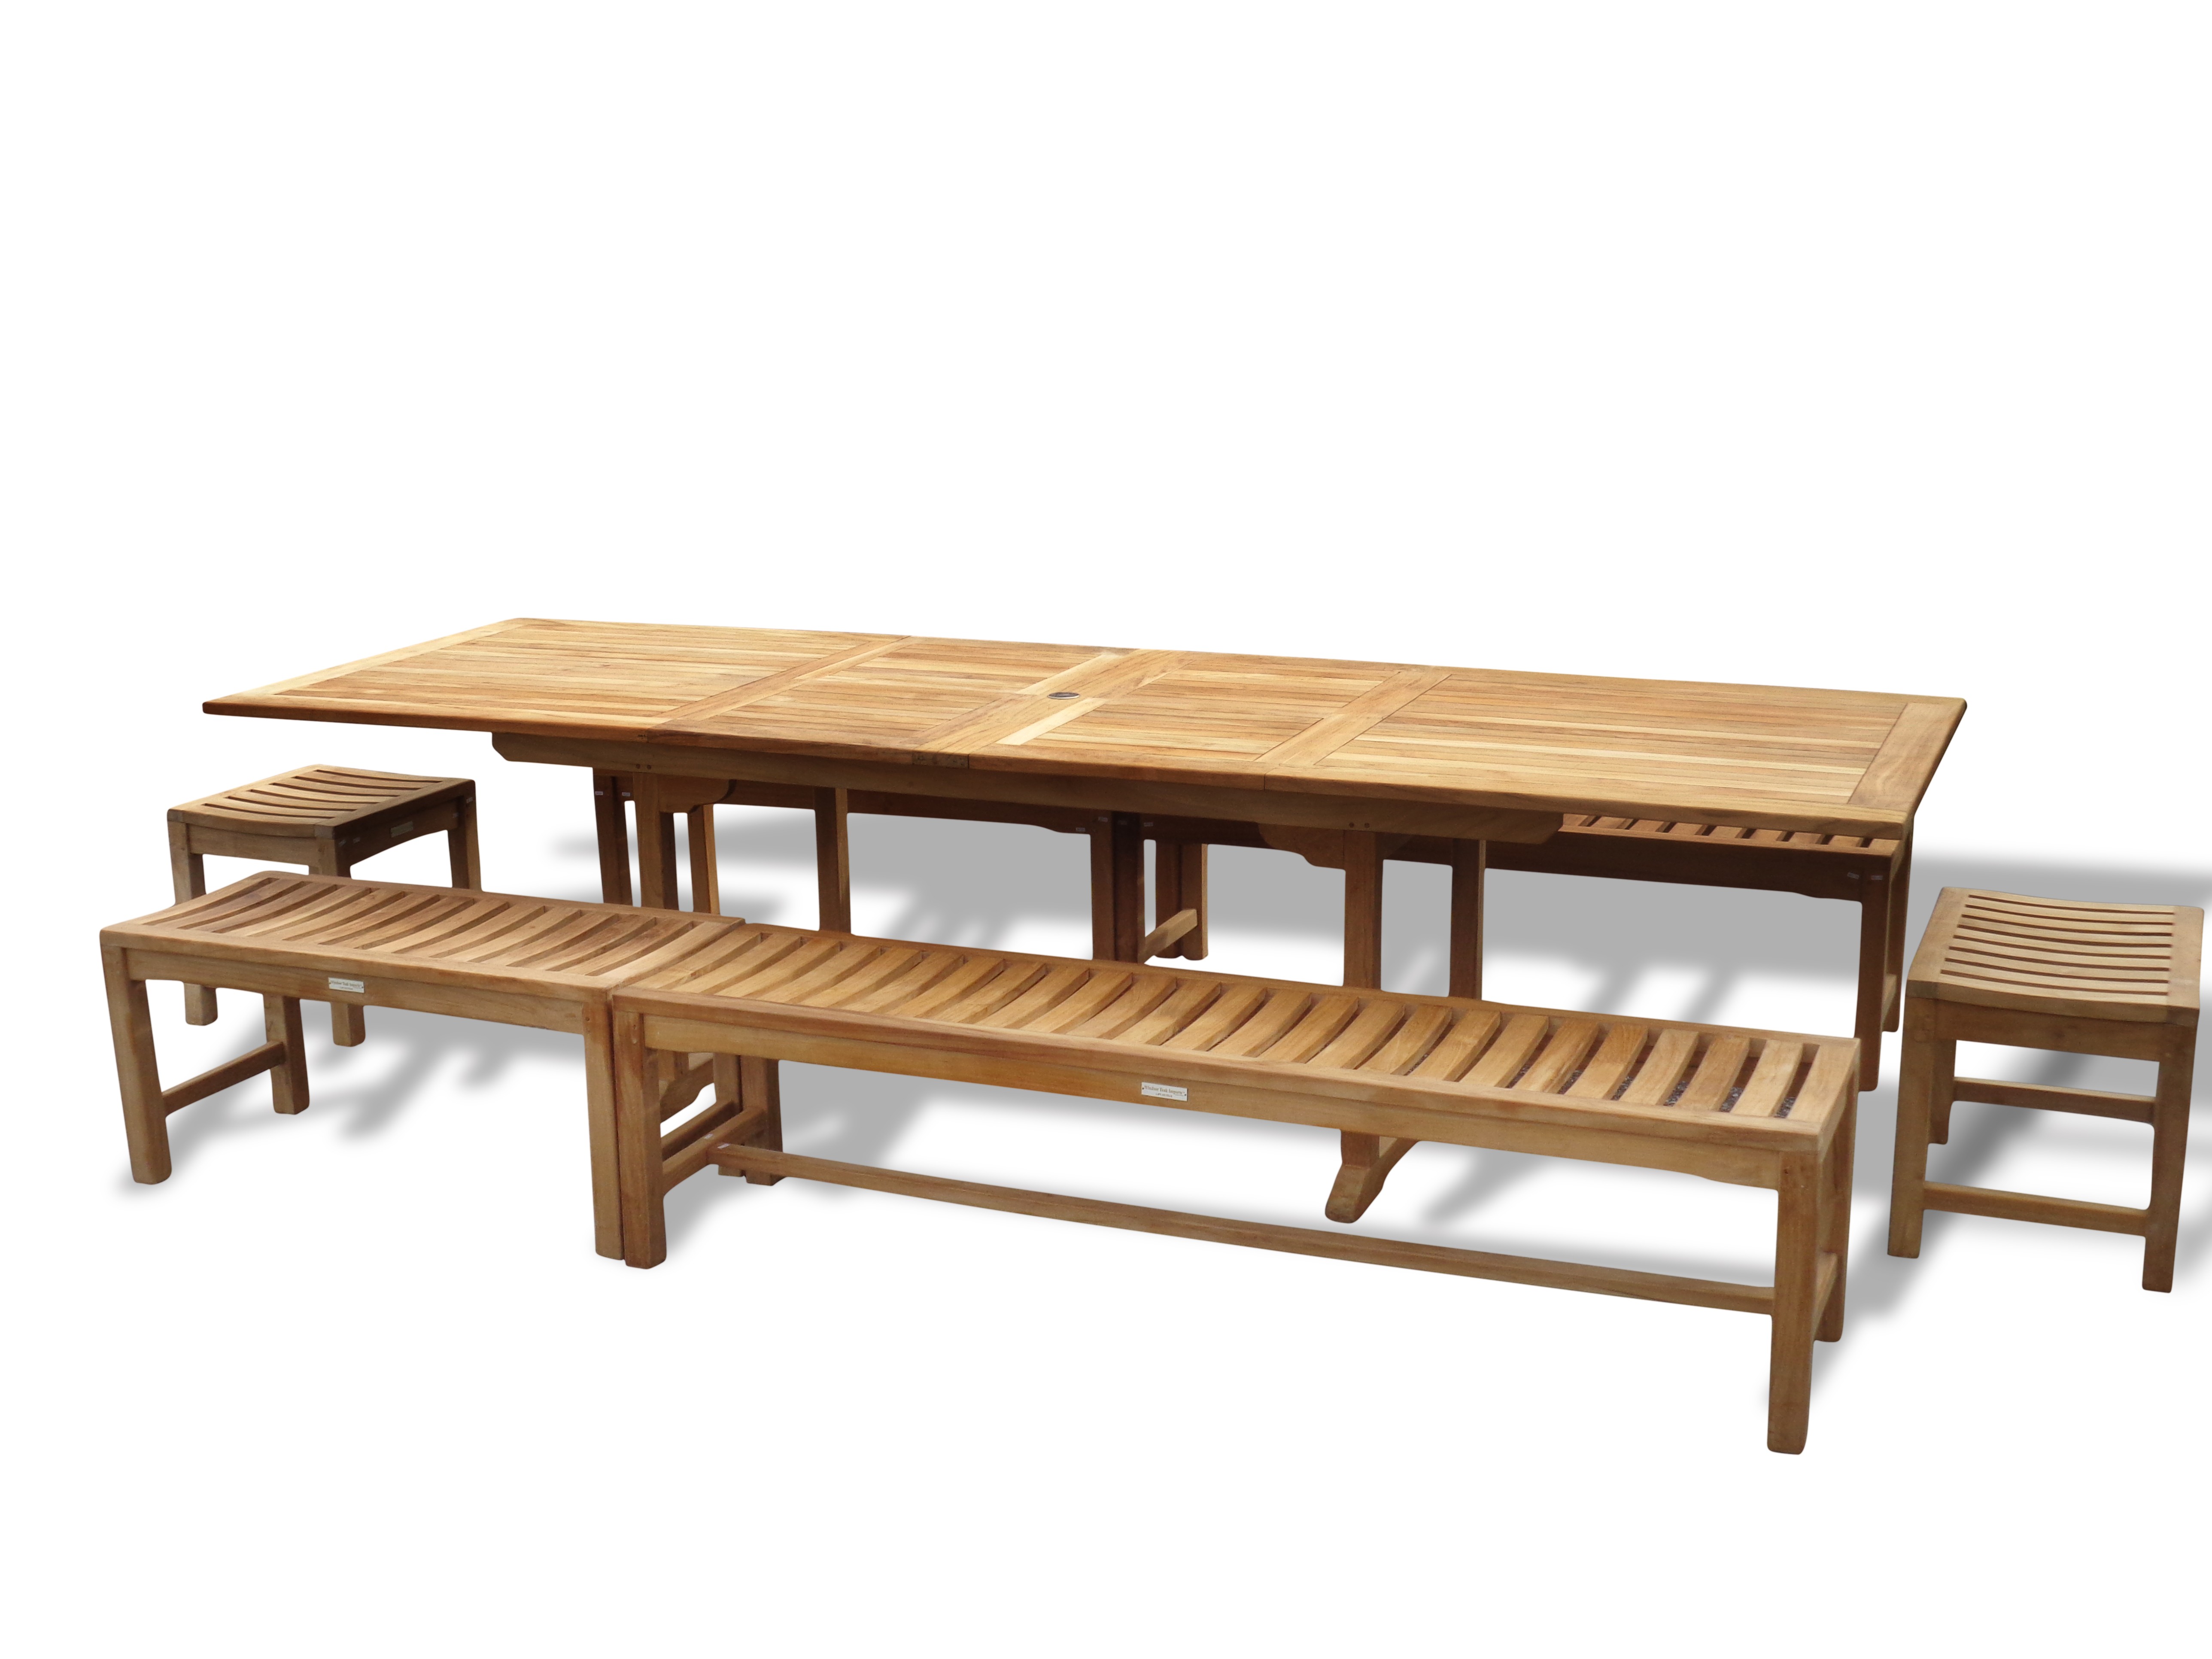 Buckingham 118" x 39" Double Leaf Rectangular Extension Table w/6 Backless Benches...Seats 14 Adults